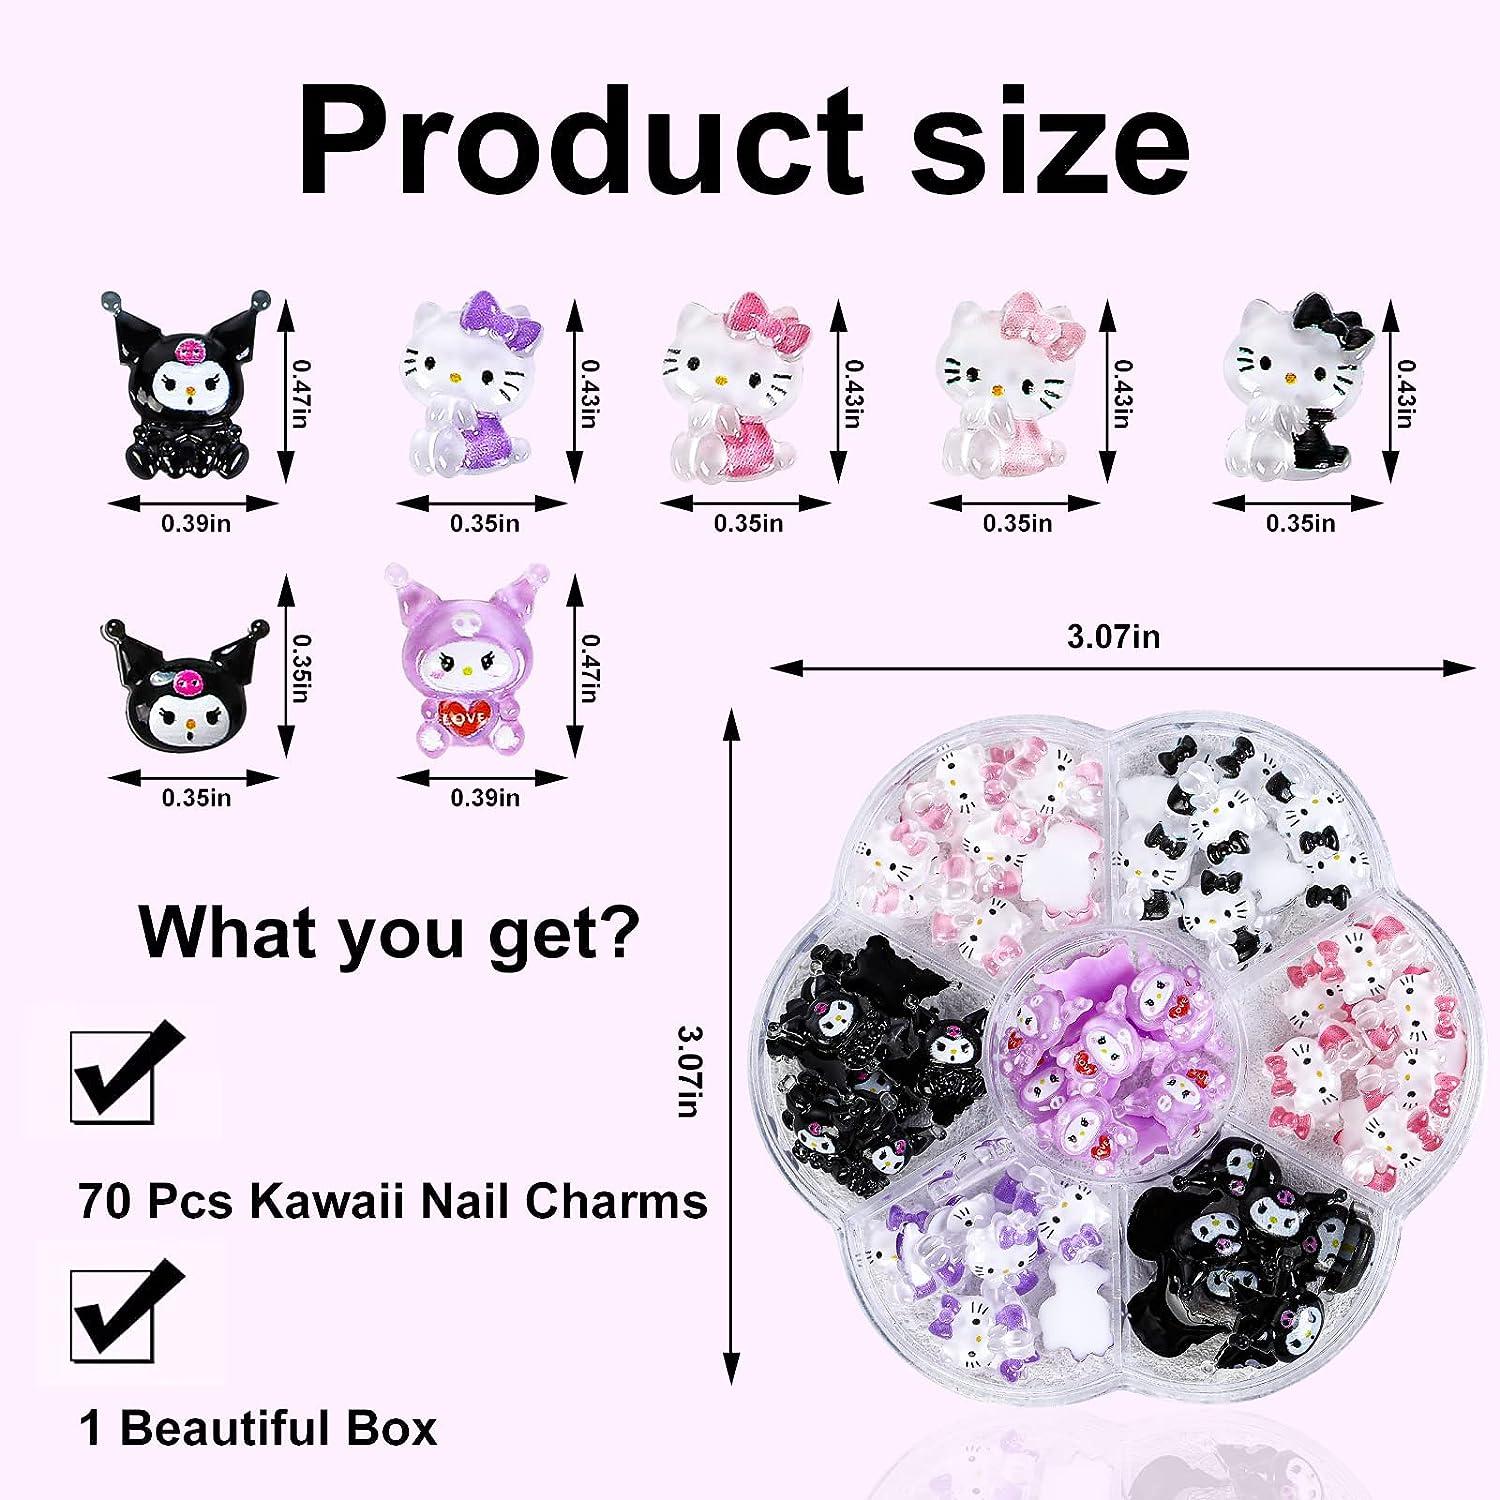 Hello Kitty Bling Jelly Stickers (Per Sheet)